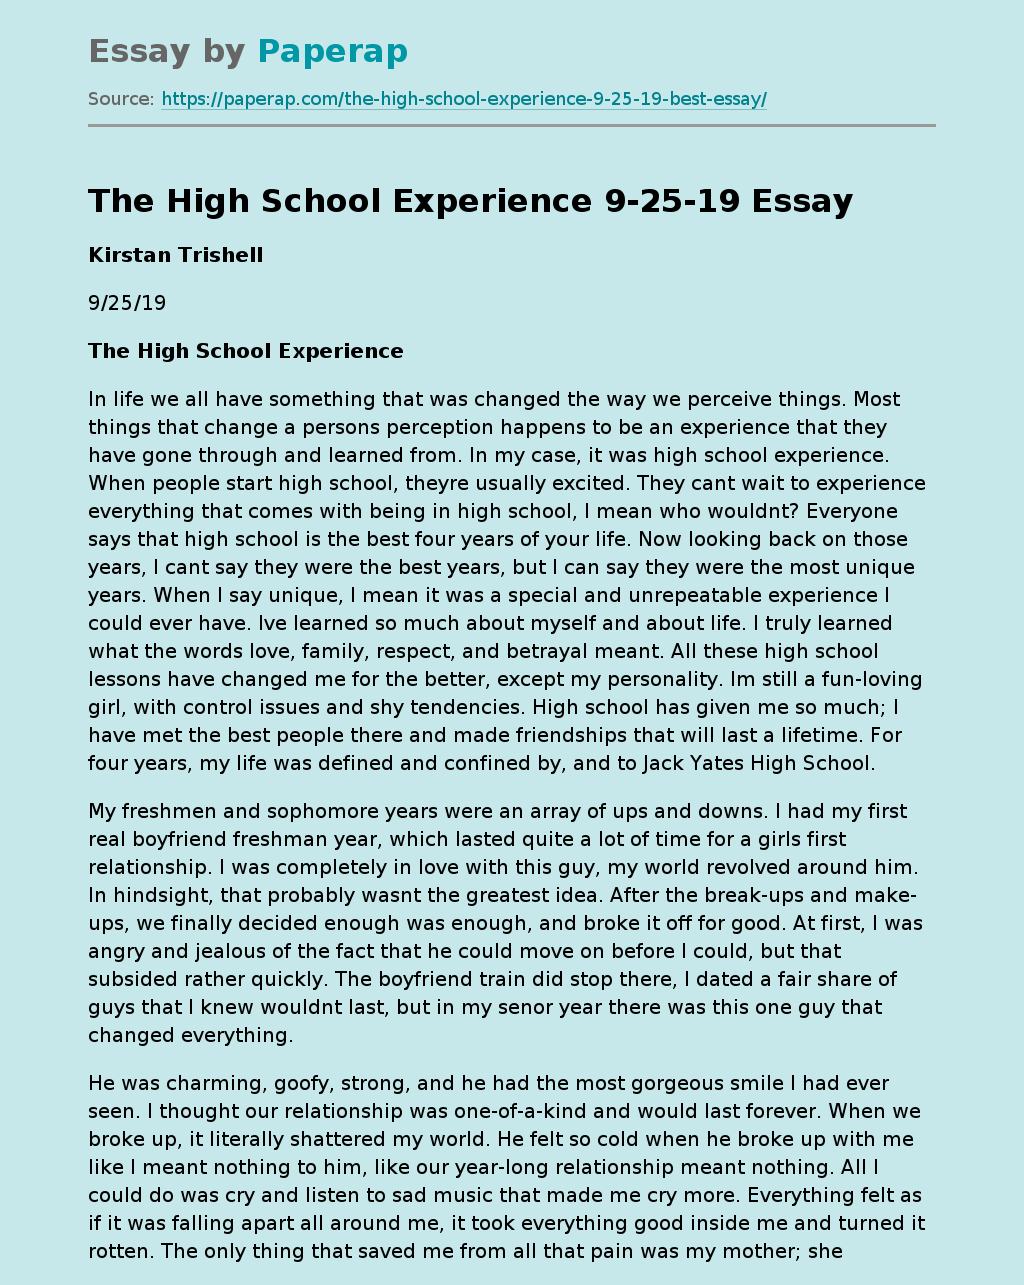 The High School Experience 9-25-19